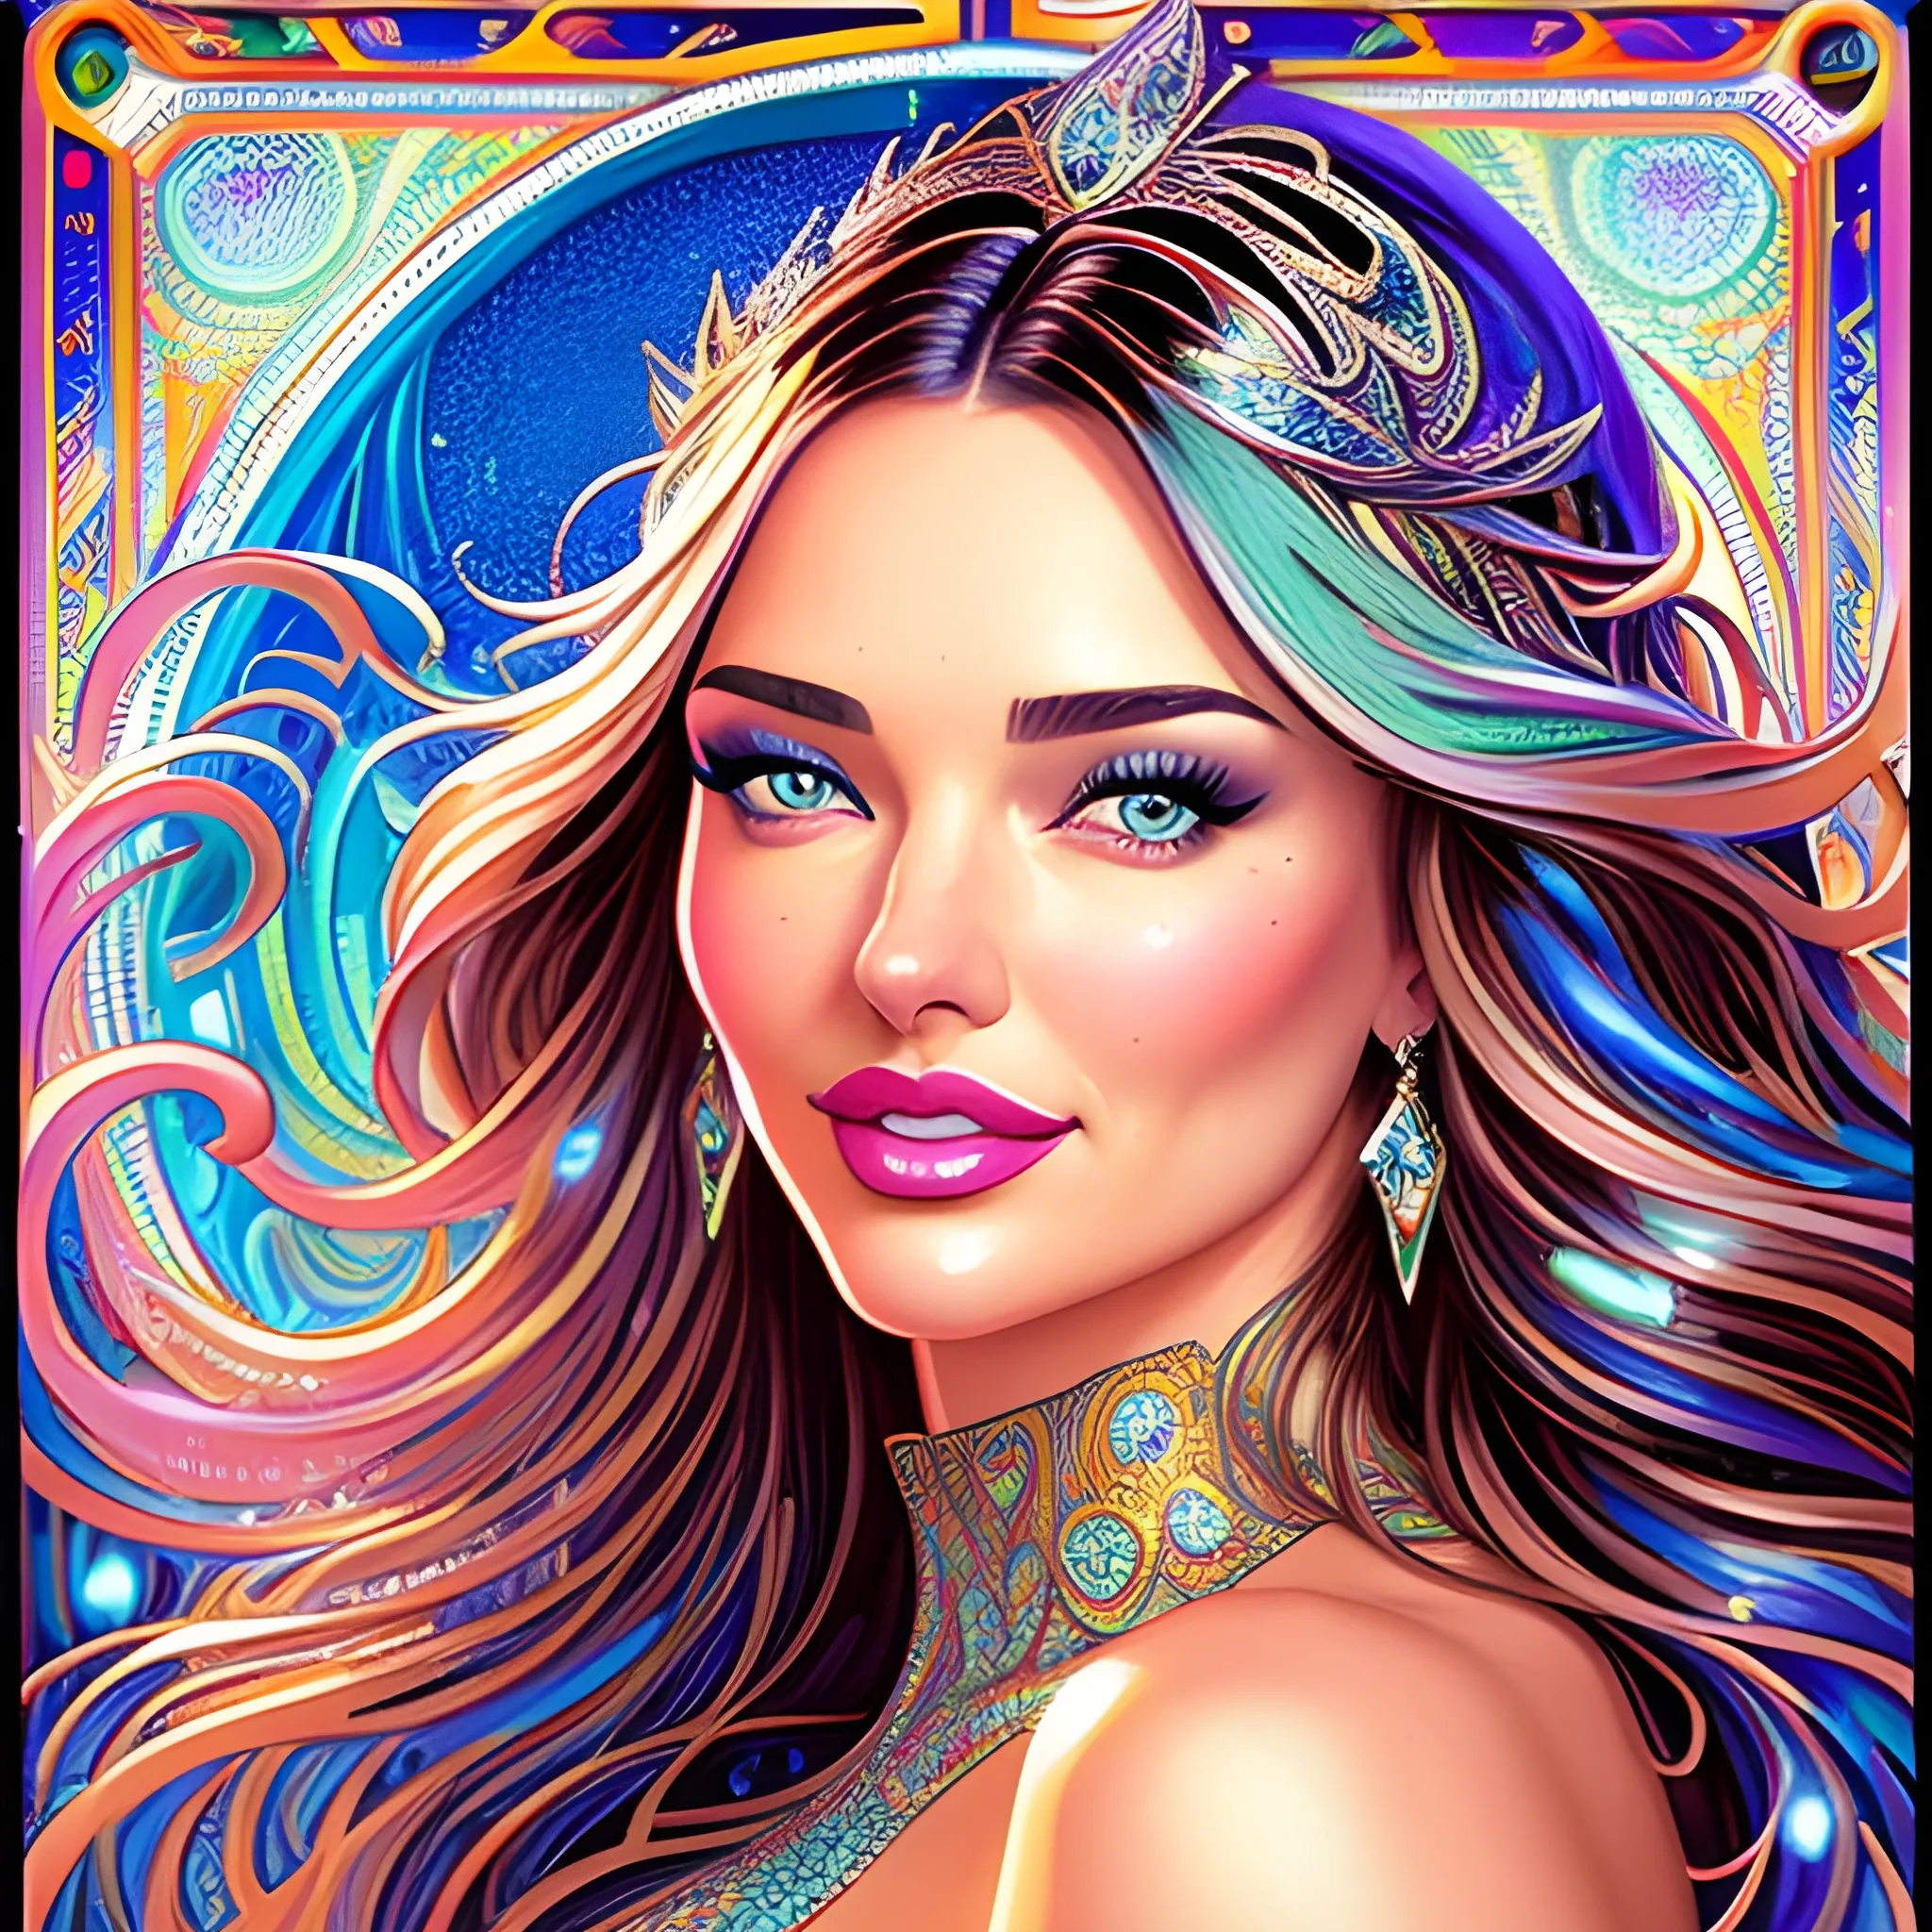 young Miranda Kerr, her highly detailed attractive face, meticulously detailed, multi-hued white-blond hair, blue eyes, dimple; by James R. Eads, Fausto-Giurescu, Tania Rivilis, Maxfield Parrish, Alphonse Mucha, Dan Mumford; luminous colorful sparkles, glitter, airbrush, depth of field, volumetric lighting Jason Beam art, Julie Bell art, Scott M Fischer, Neysa McMein